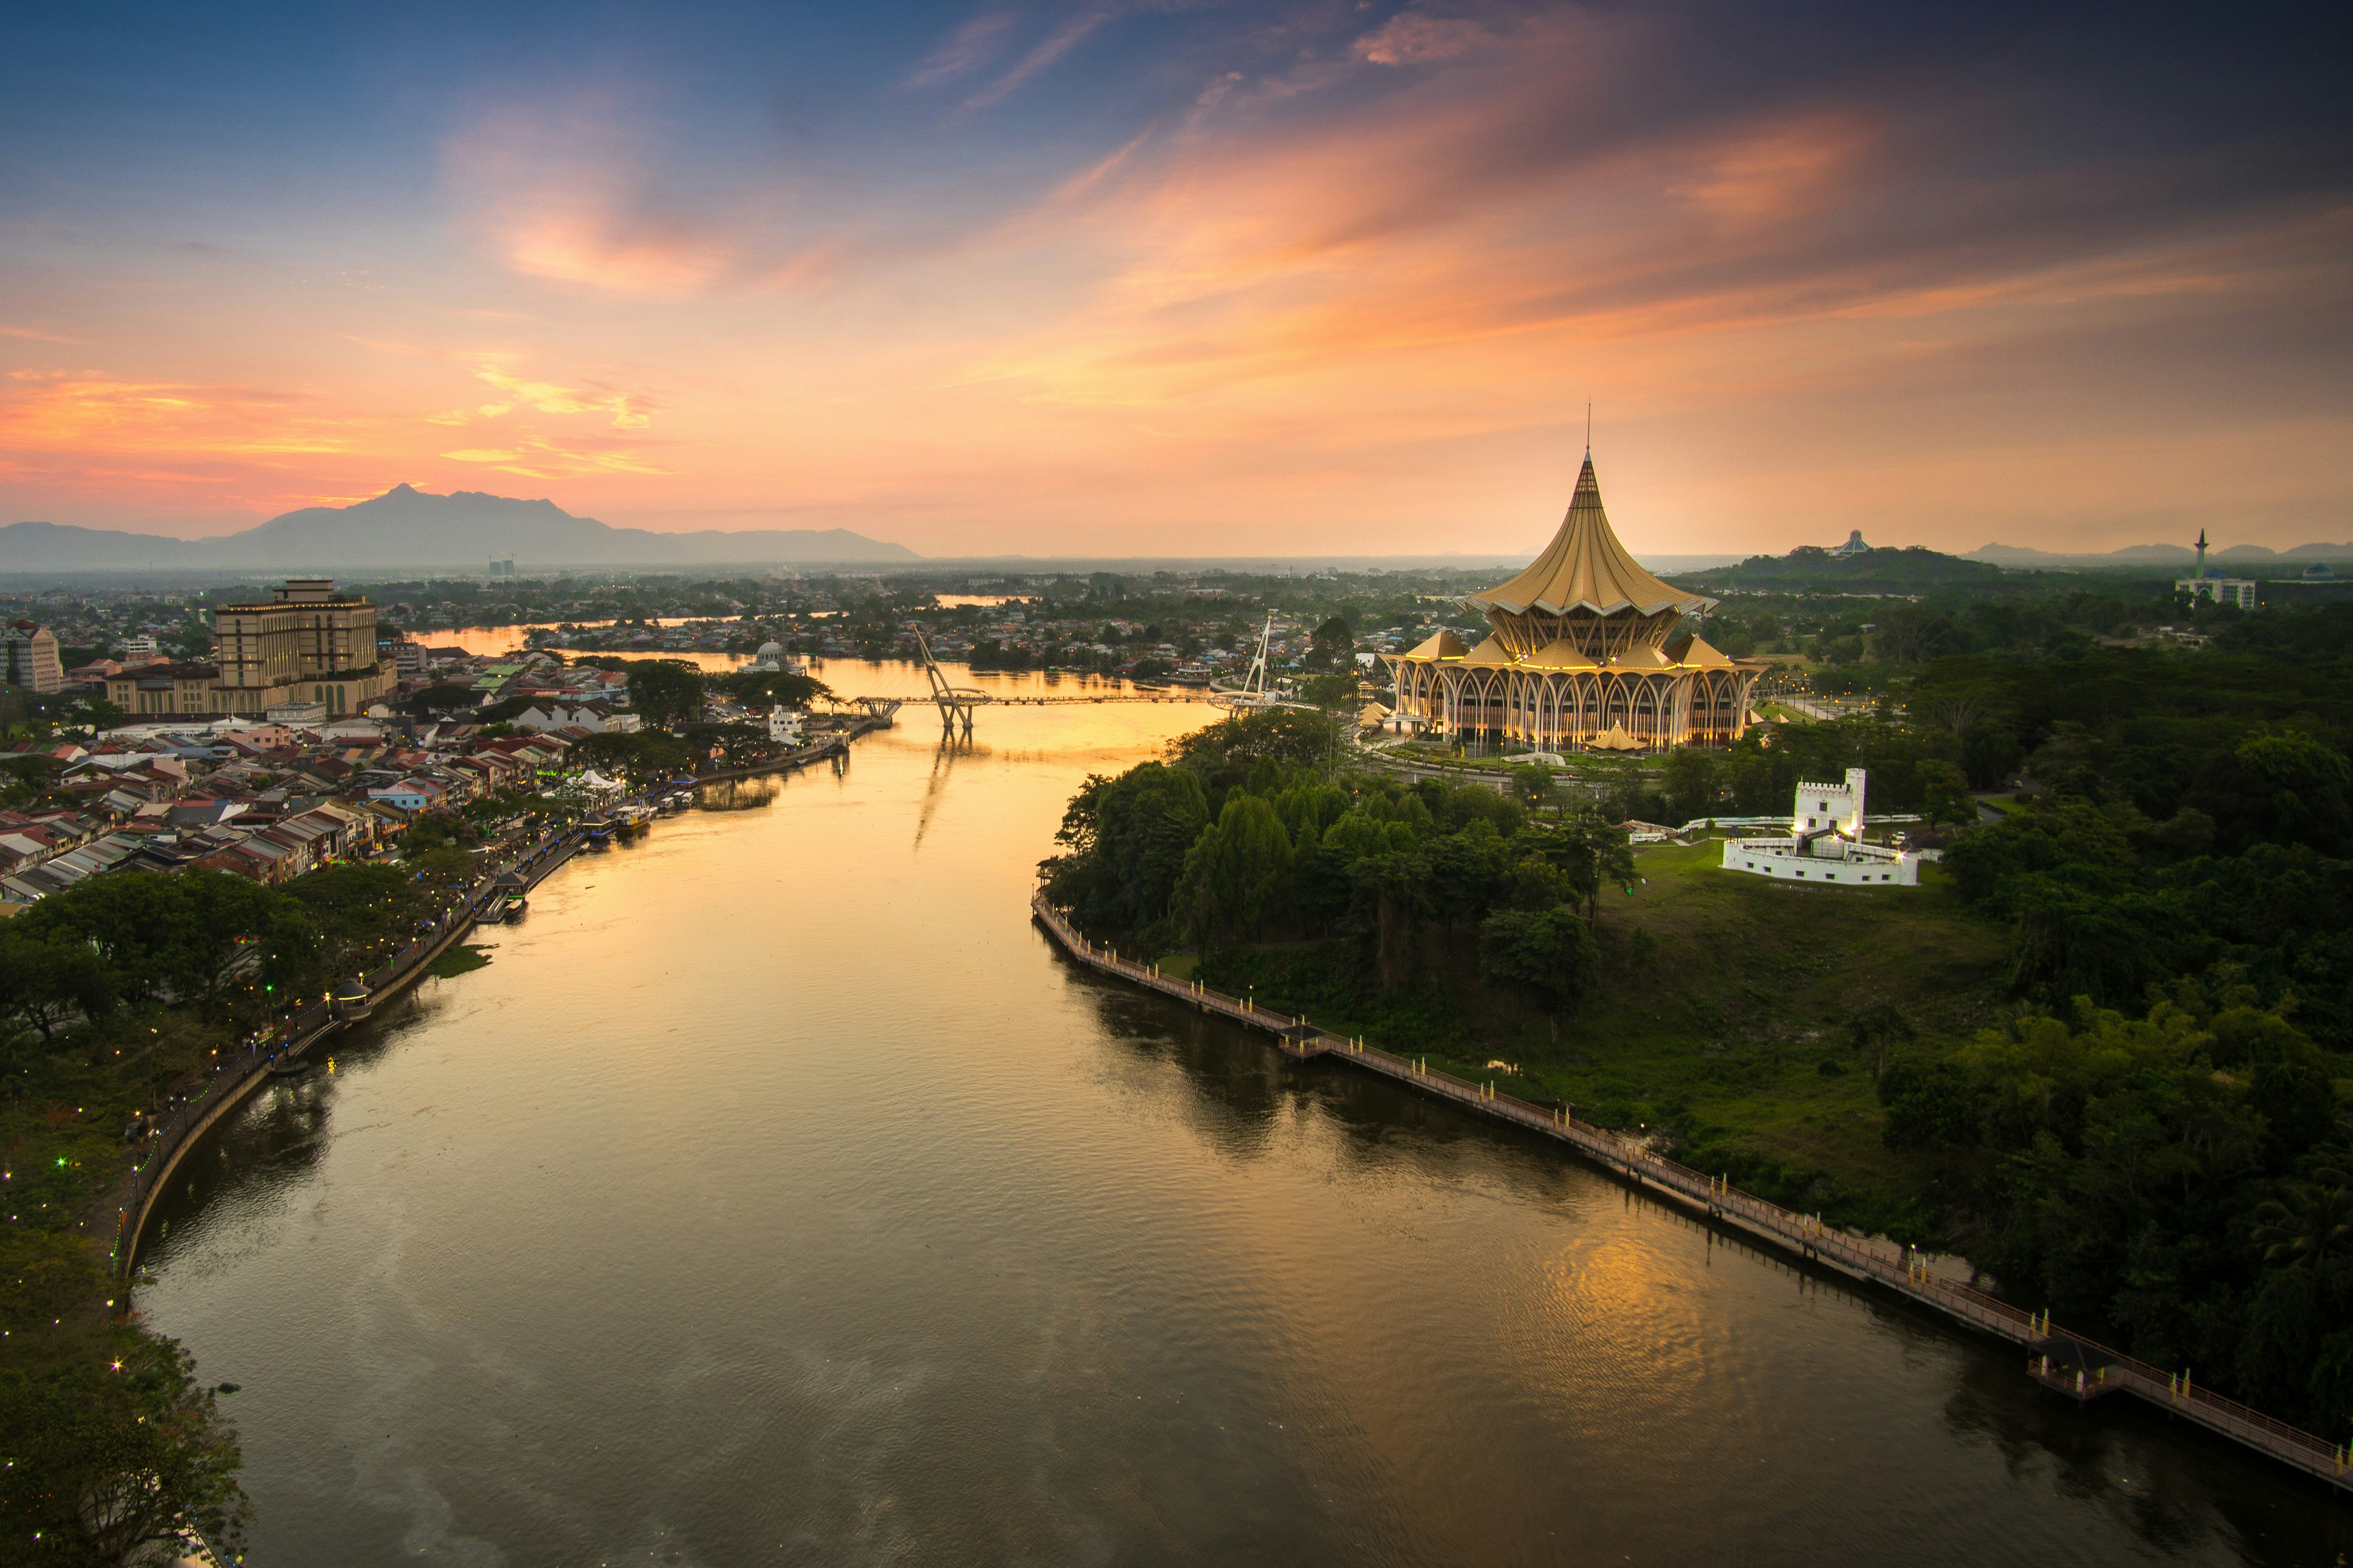 An aerial view of the city of Kuching in Sarawak, Borneo. The image shows the city's river winding away into the distance, passing large buildings and grand temples. In the distance, a mountain range is visible.